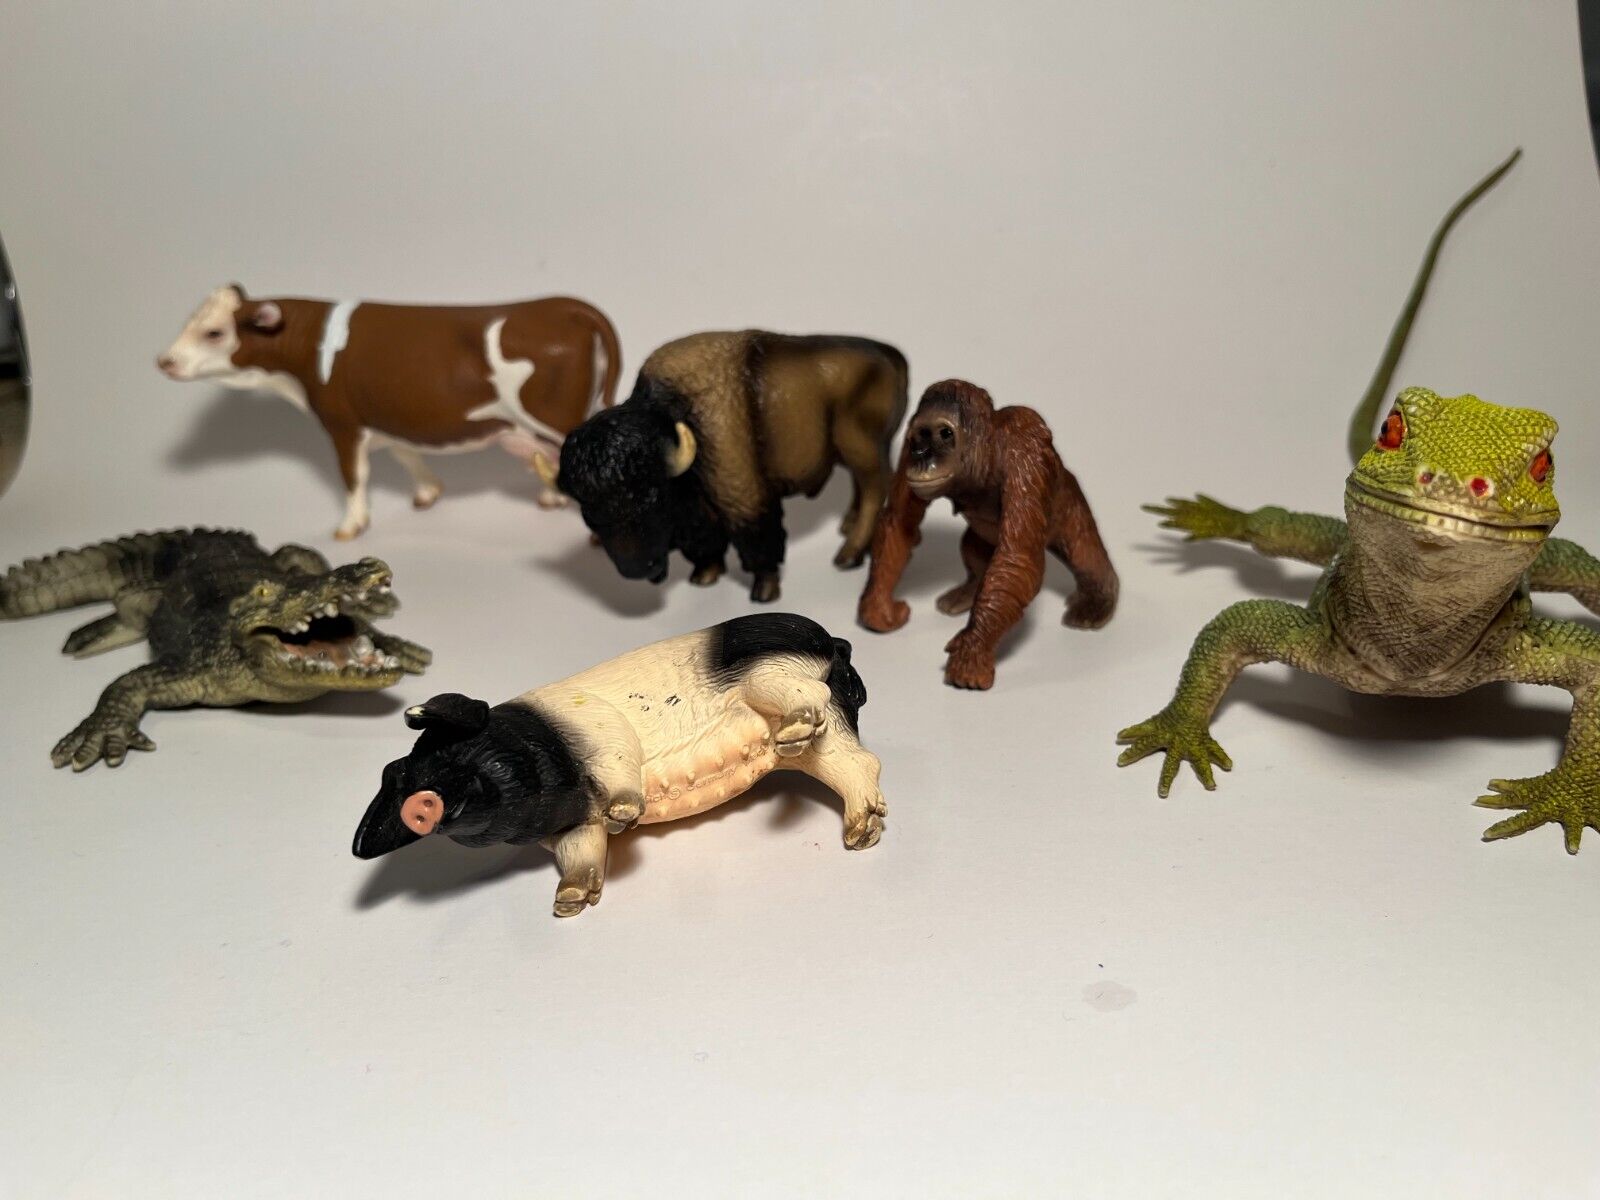 Schleich Germany, TOYSMITH High Quality Realistic Artwork Animals Collection Schleich Germany, TOYSMITH Schleich Germany - фотография #12